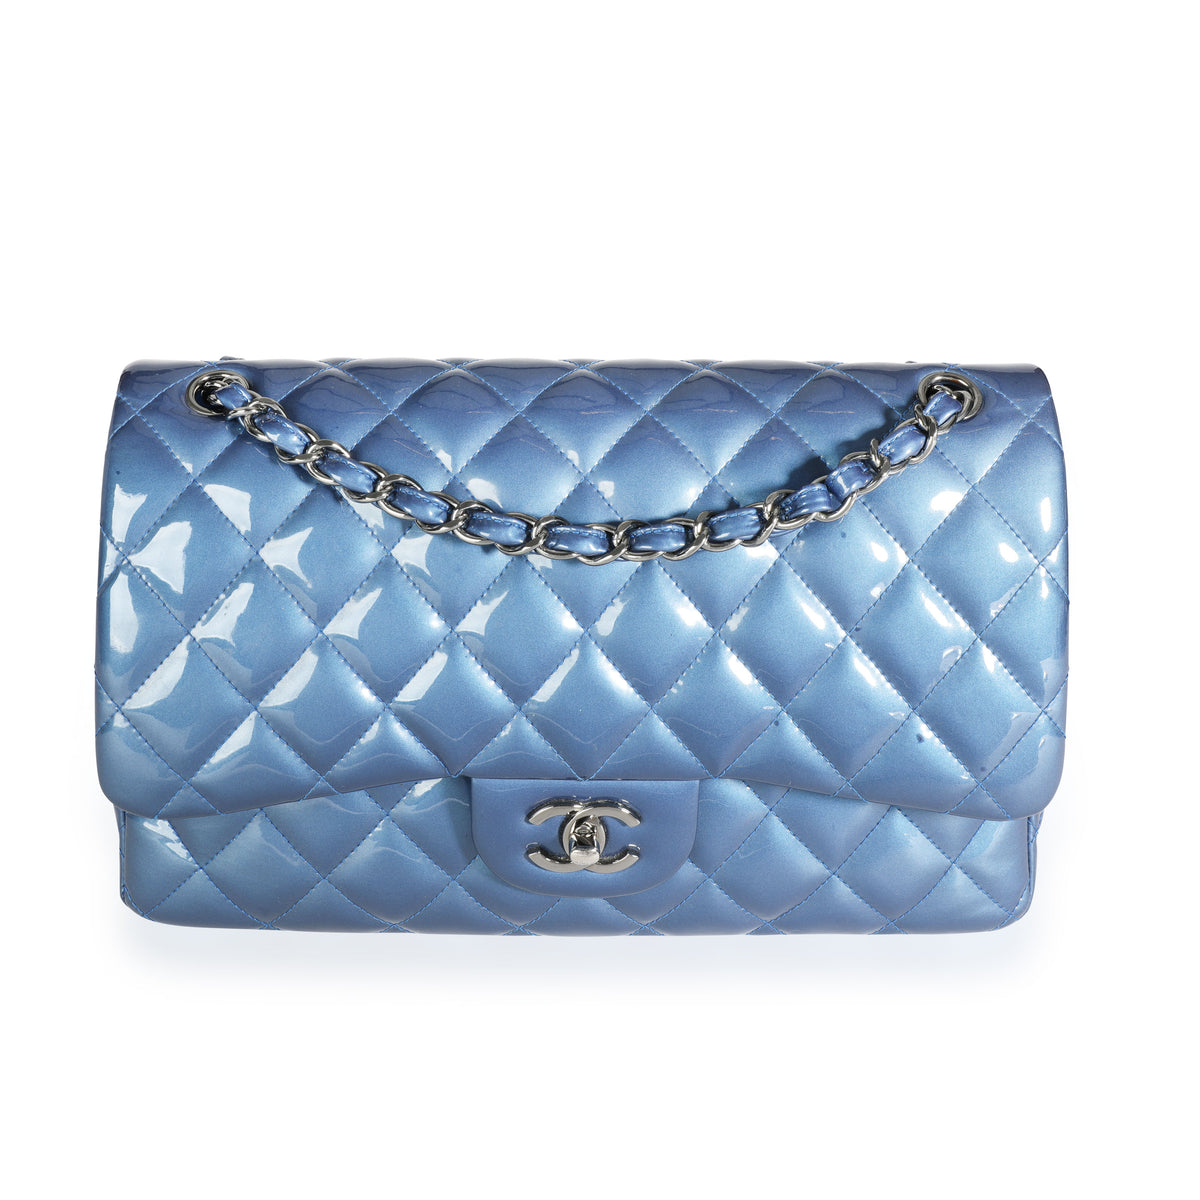 Chanel Blue Patent Leather Quilted Jumbo Classic Double Flap Bag